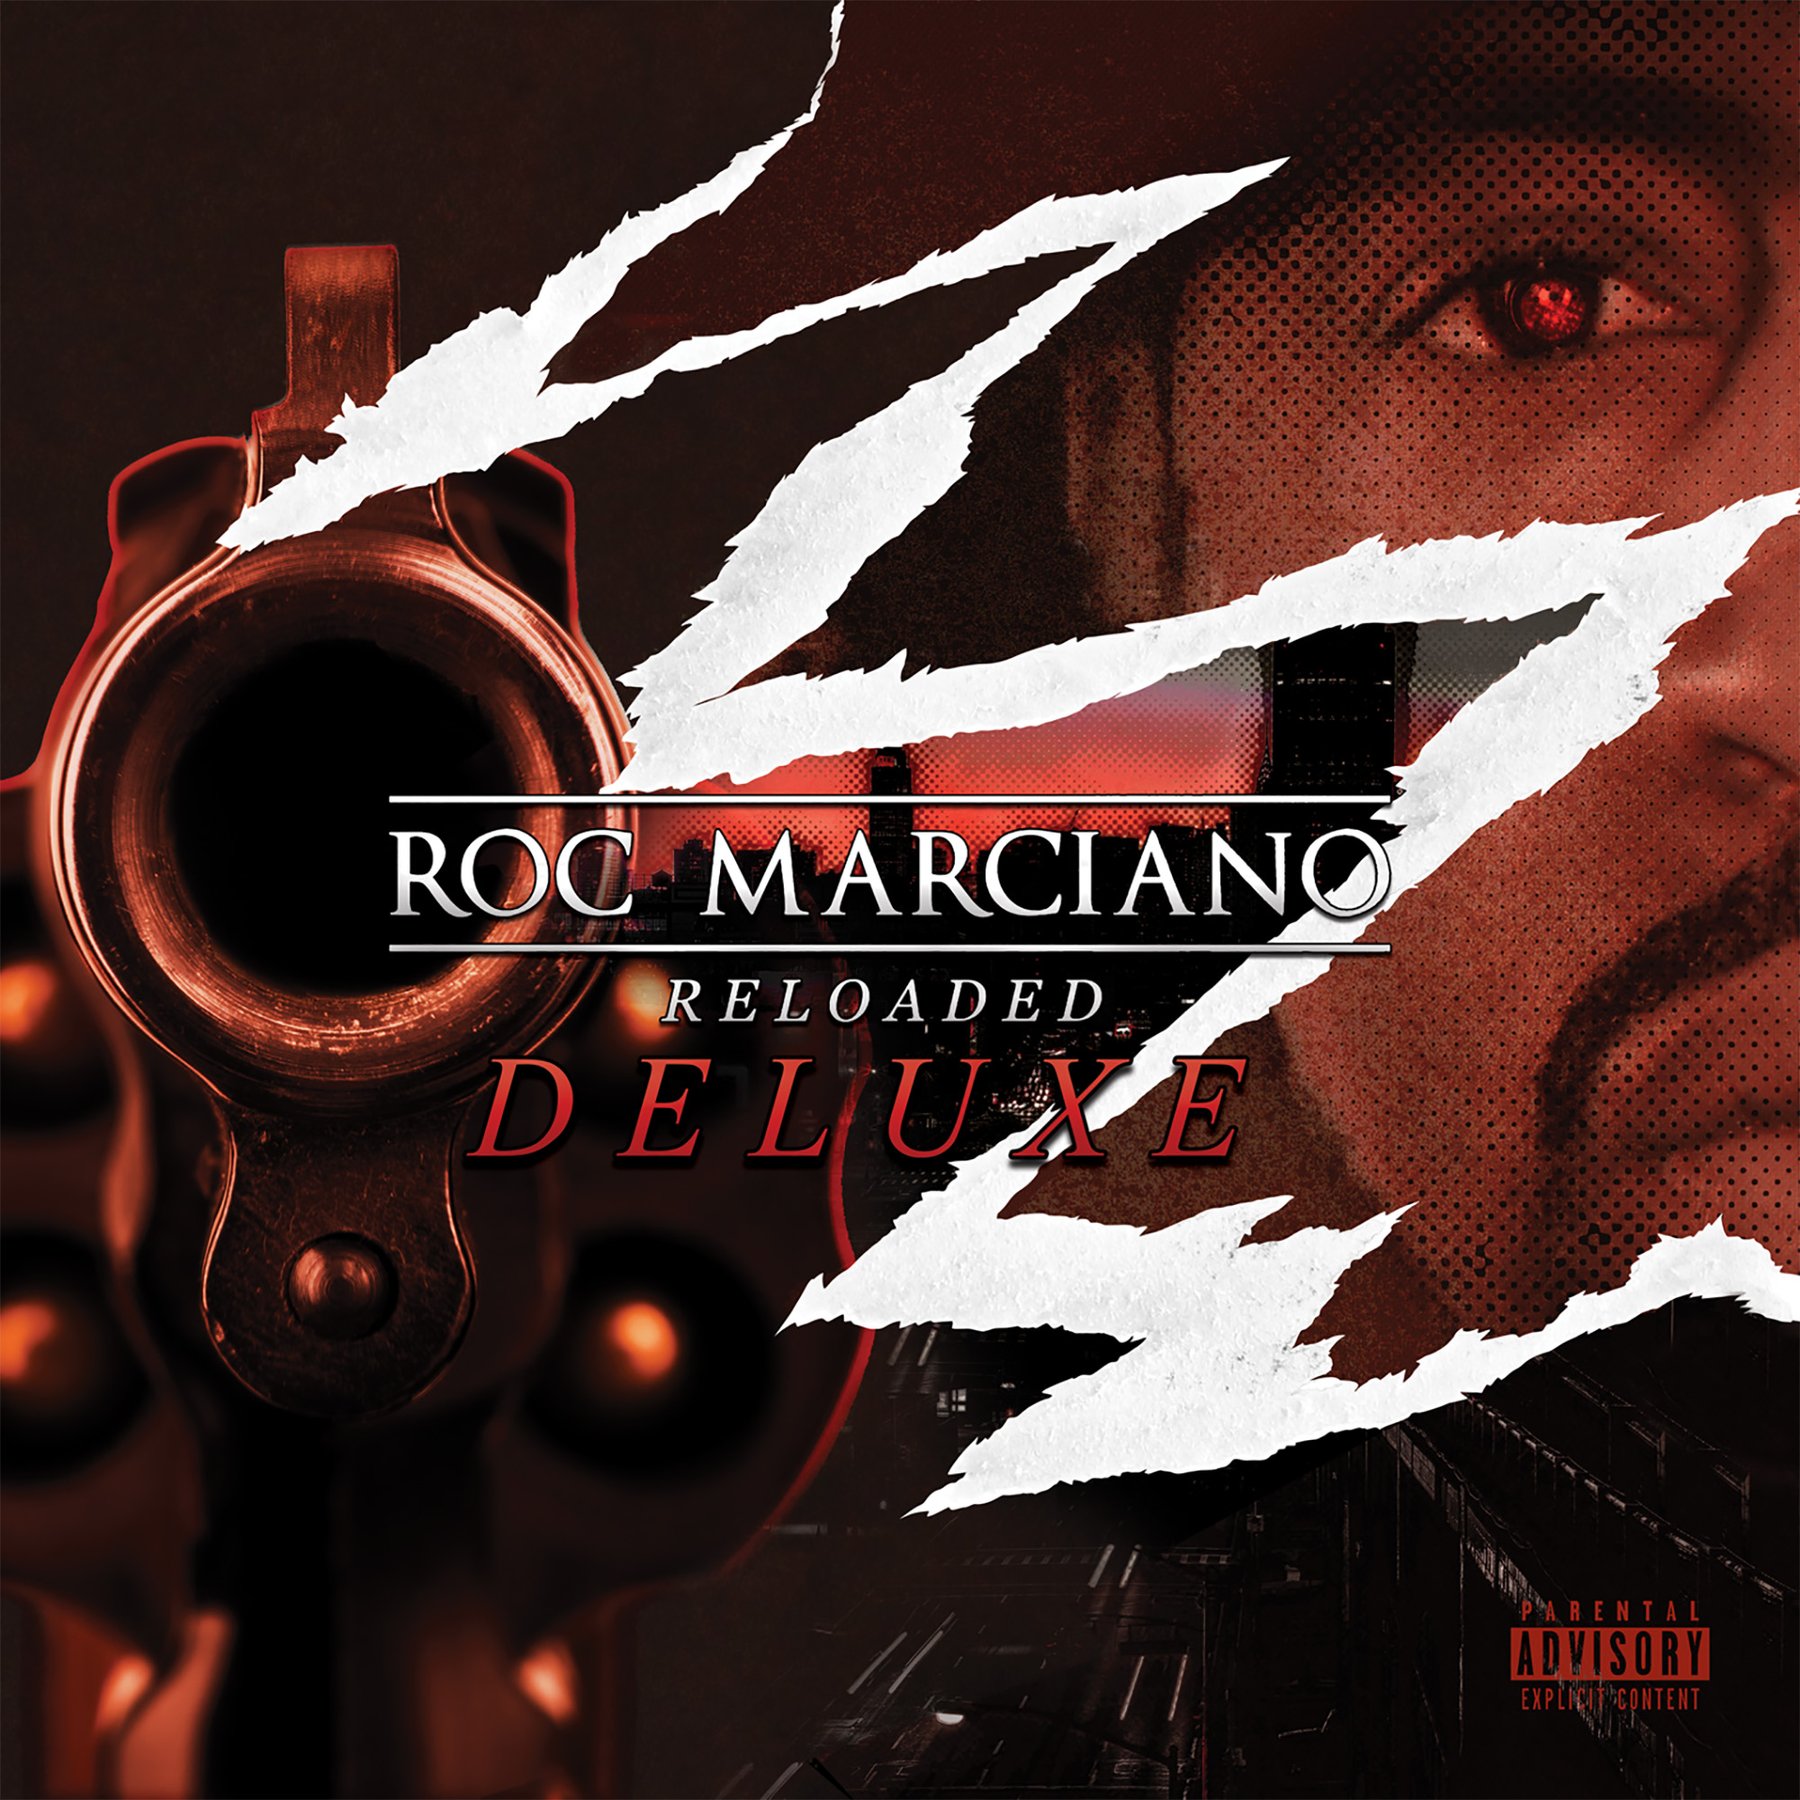 roc marciano reloaded download